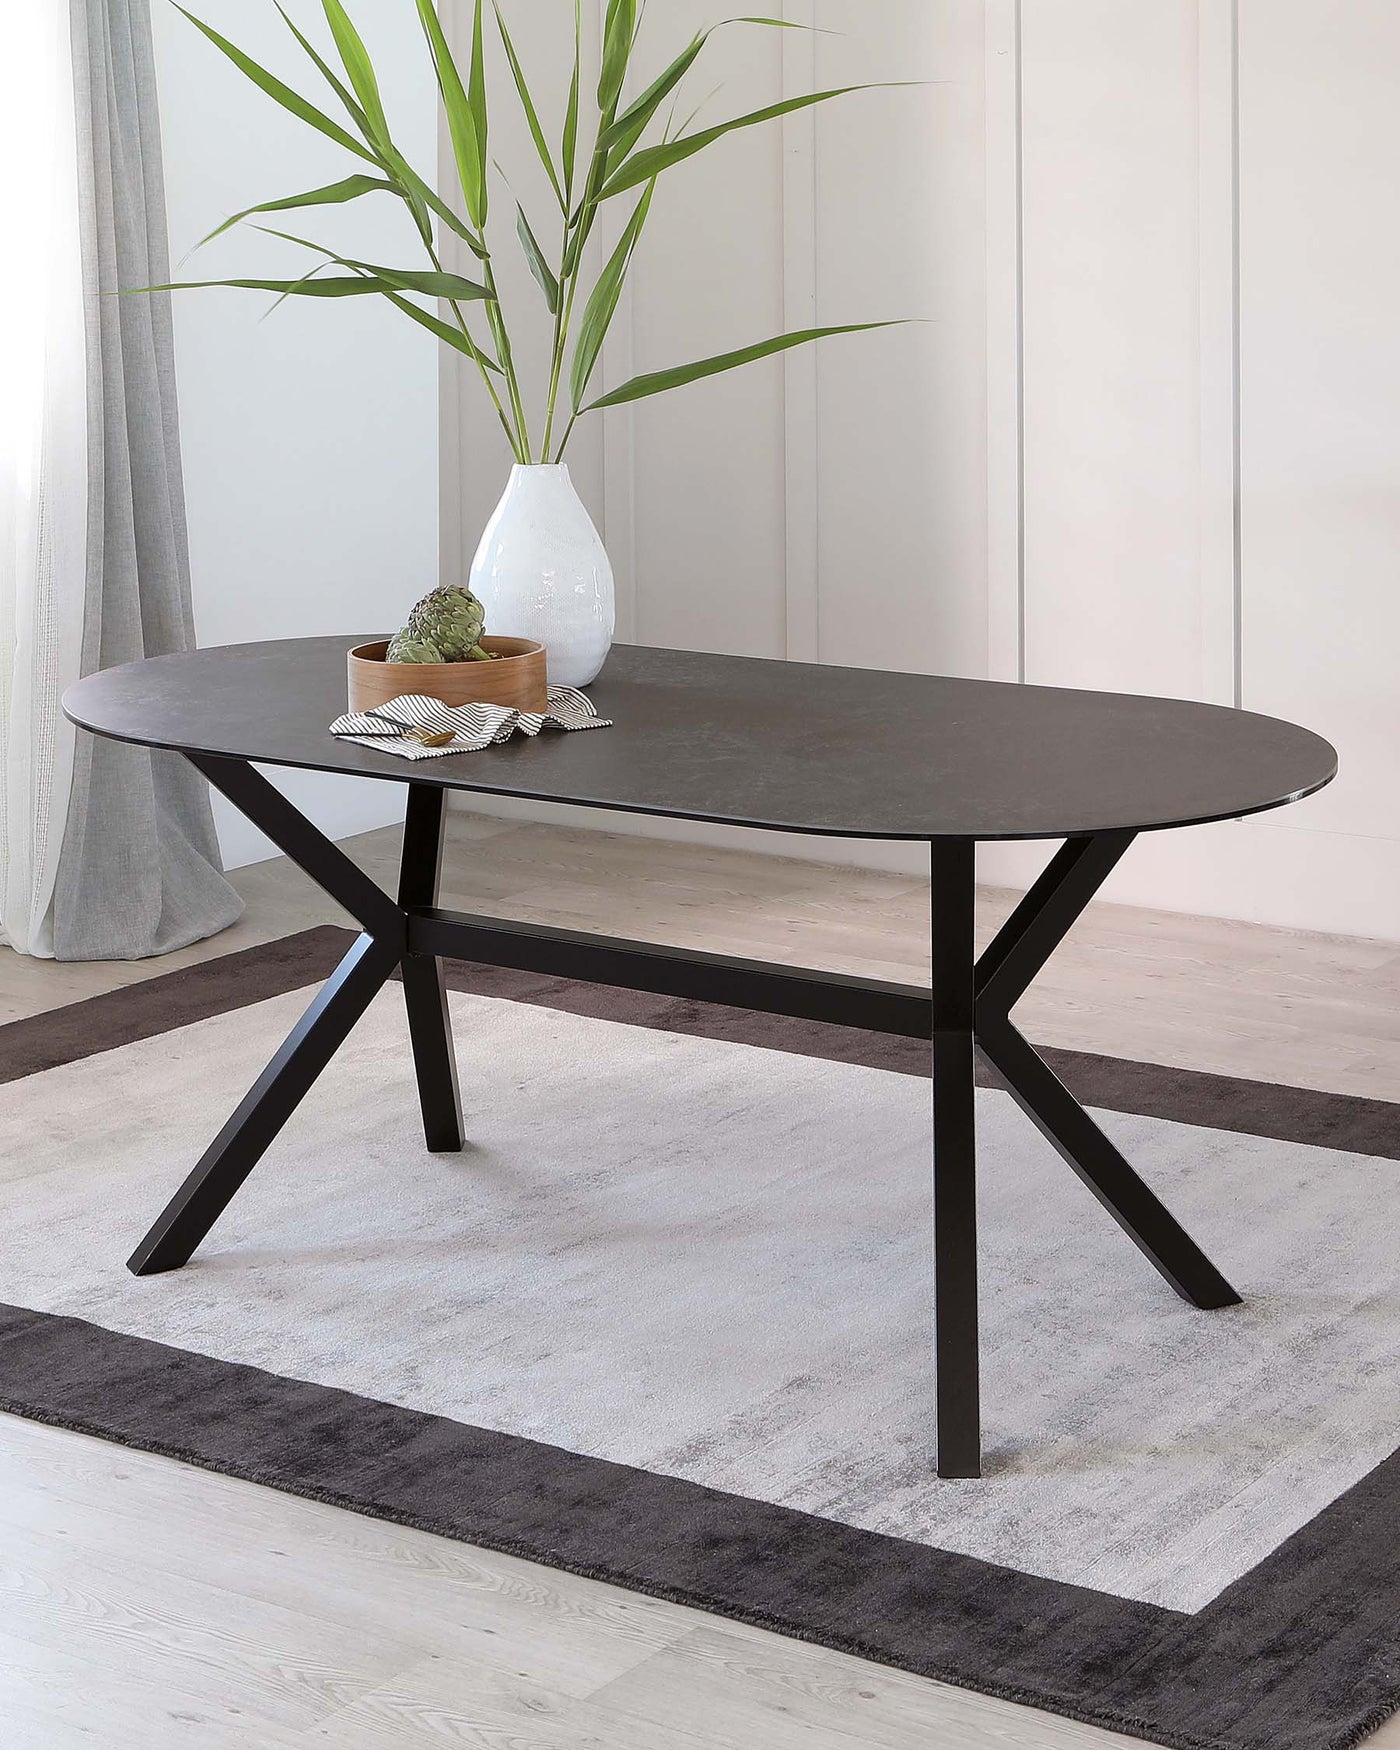 A modern oval-shaped coffee table with a dark grey matte top and angular black metal legs, displayed on a light grey area rug with a black border, in a bright room with white vertical panelling and light hardwood flooring.